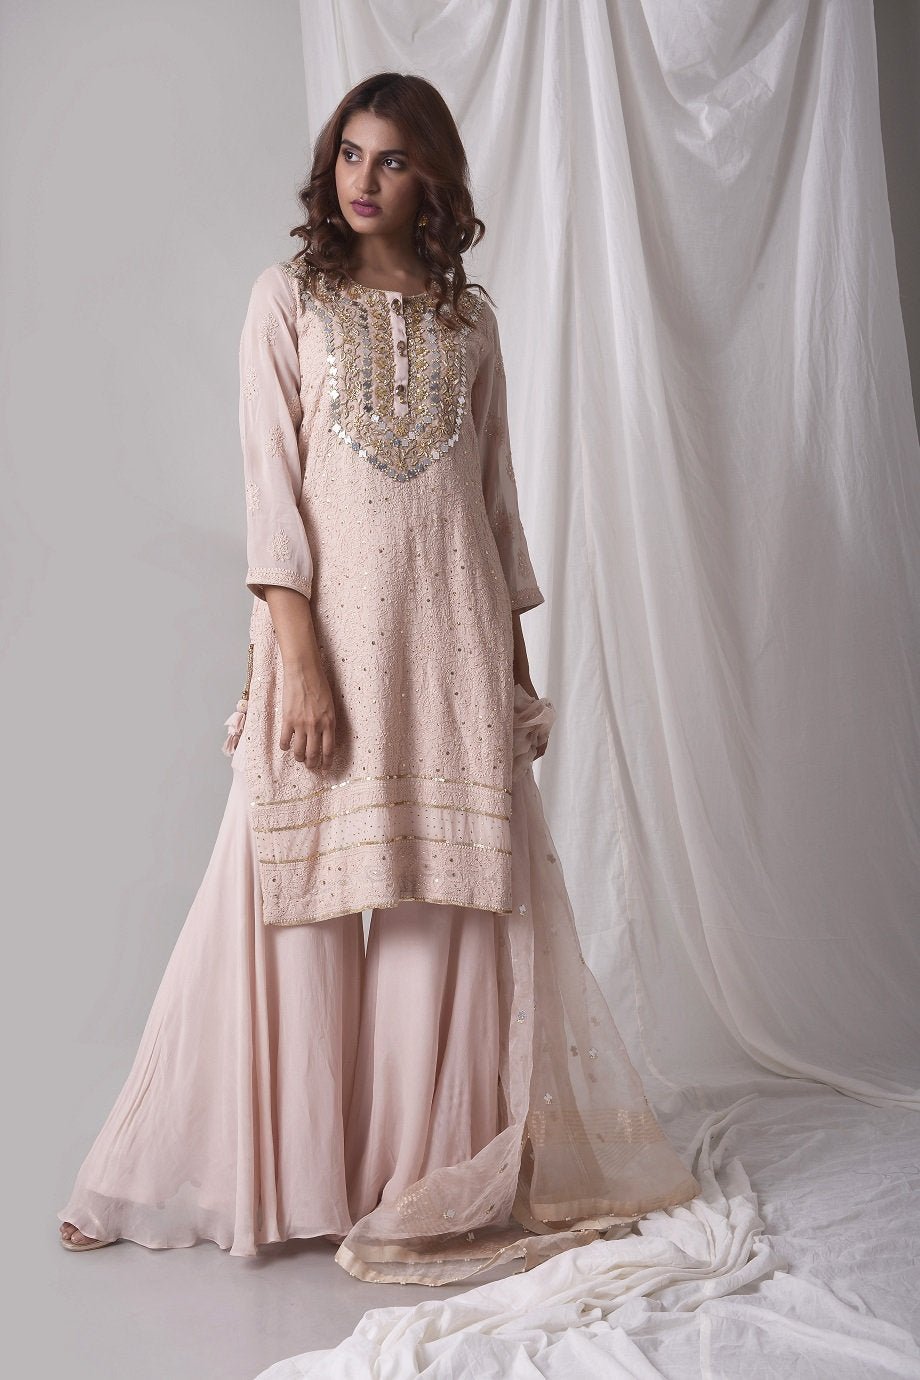 Buy powder pink georgette suit online in USA. Be the talk of parties and weddings with exquisite designer gowns, Indian suits, Anarkali dresses, Indo-western dresses from Pure Elegance Indian clothing store in USA .Shop online now.-full view-2